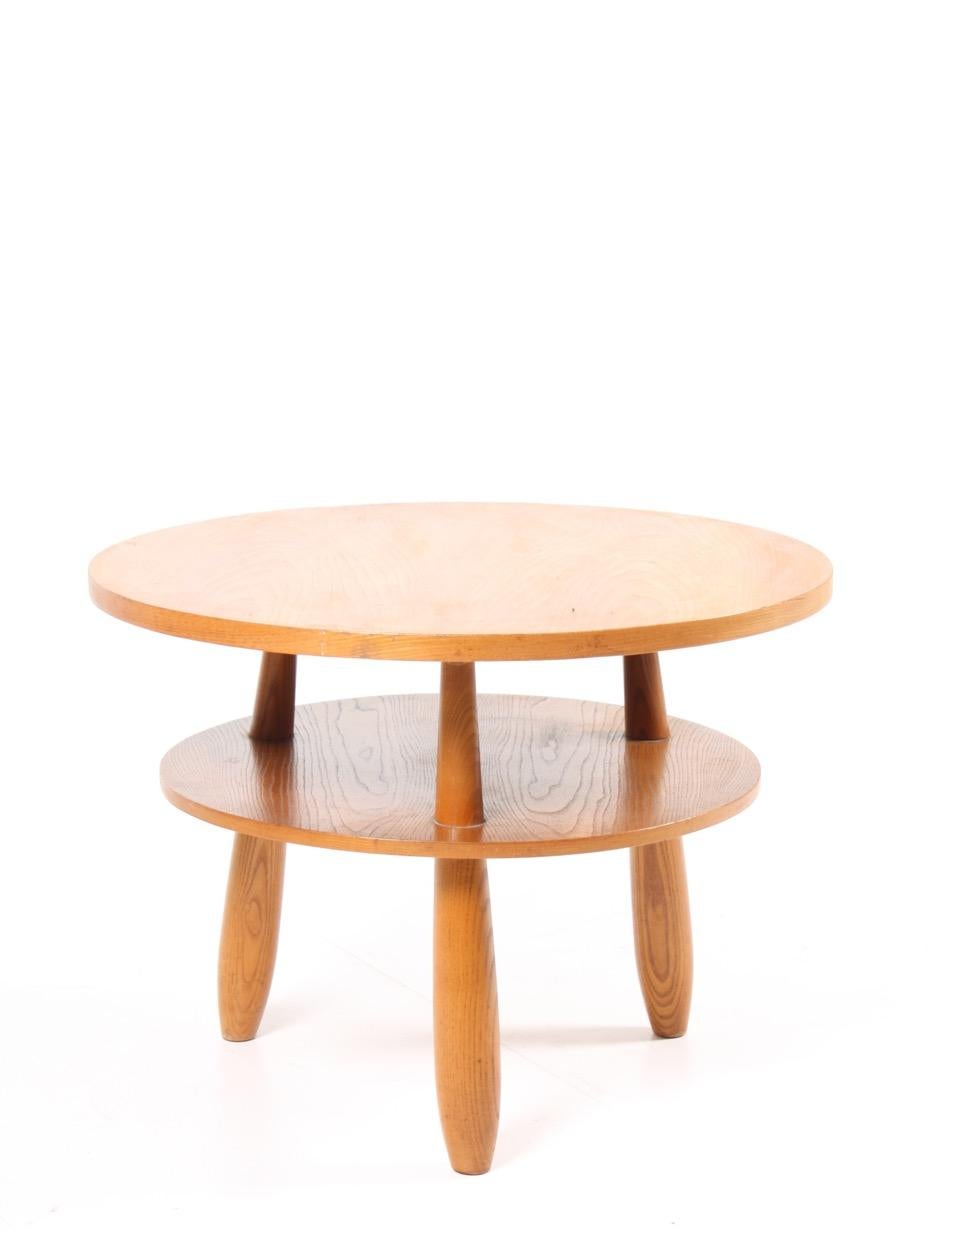 1940s side table in elm, designed and Made in Denmark - Original patinated condition.